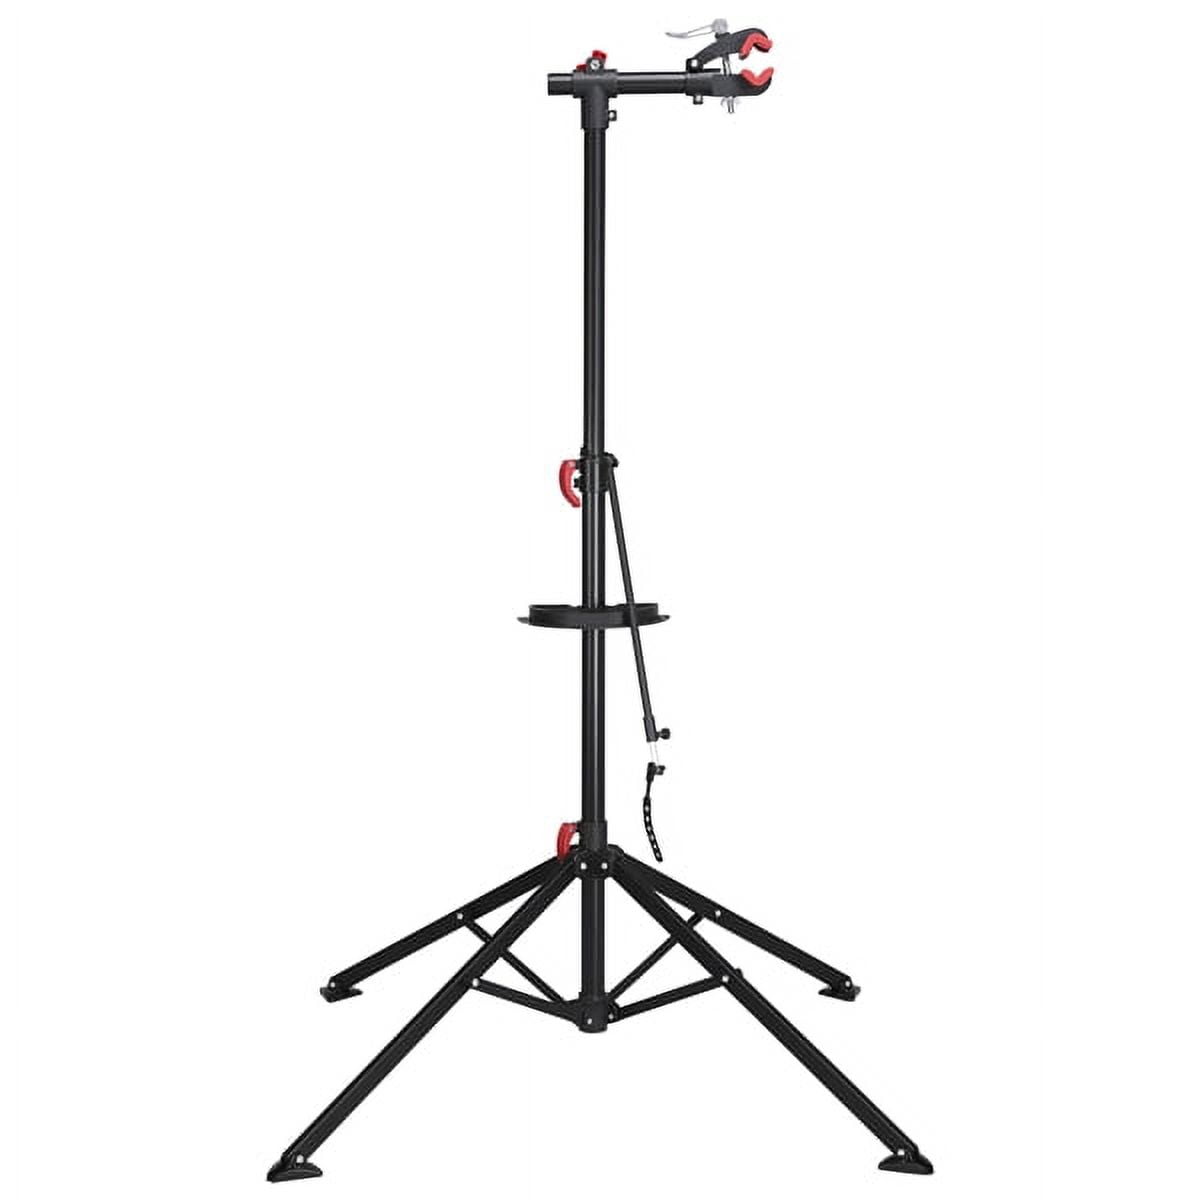 Adjustable Bike Repair Stand Bicycle Workstand with Multiple Quick Release Telescopic Arm for Home Bicycle